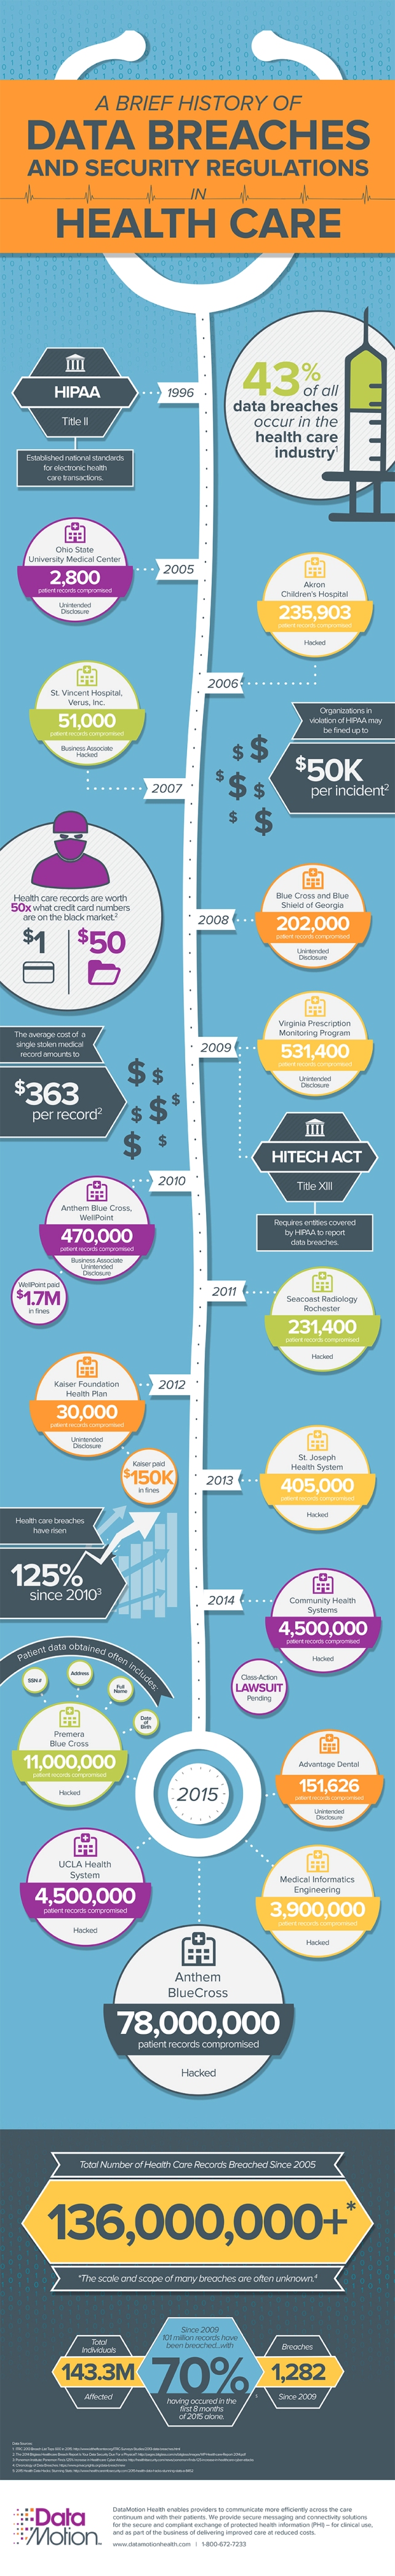 History of HIPAA and Data Breaches 